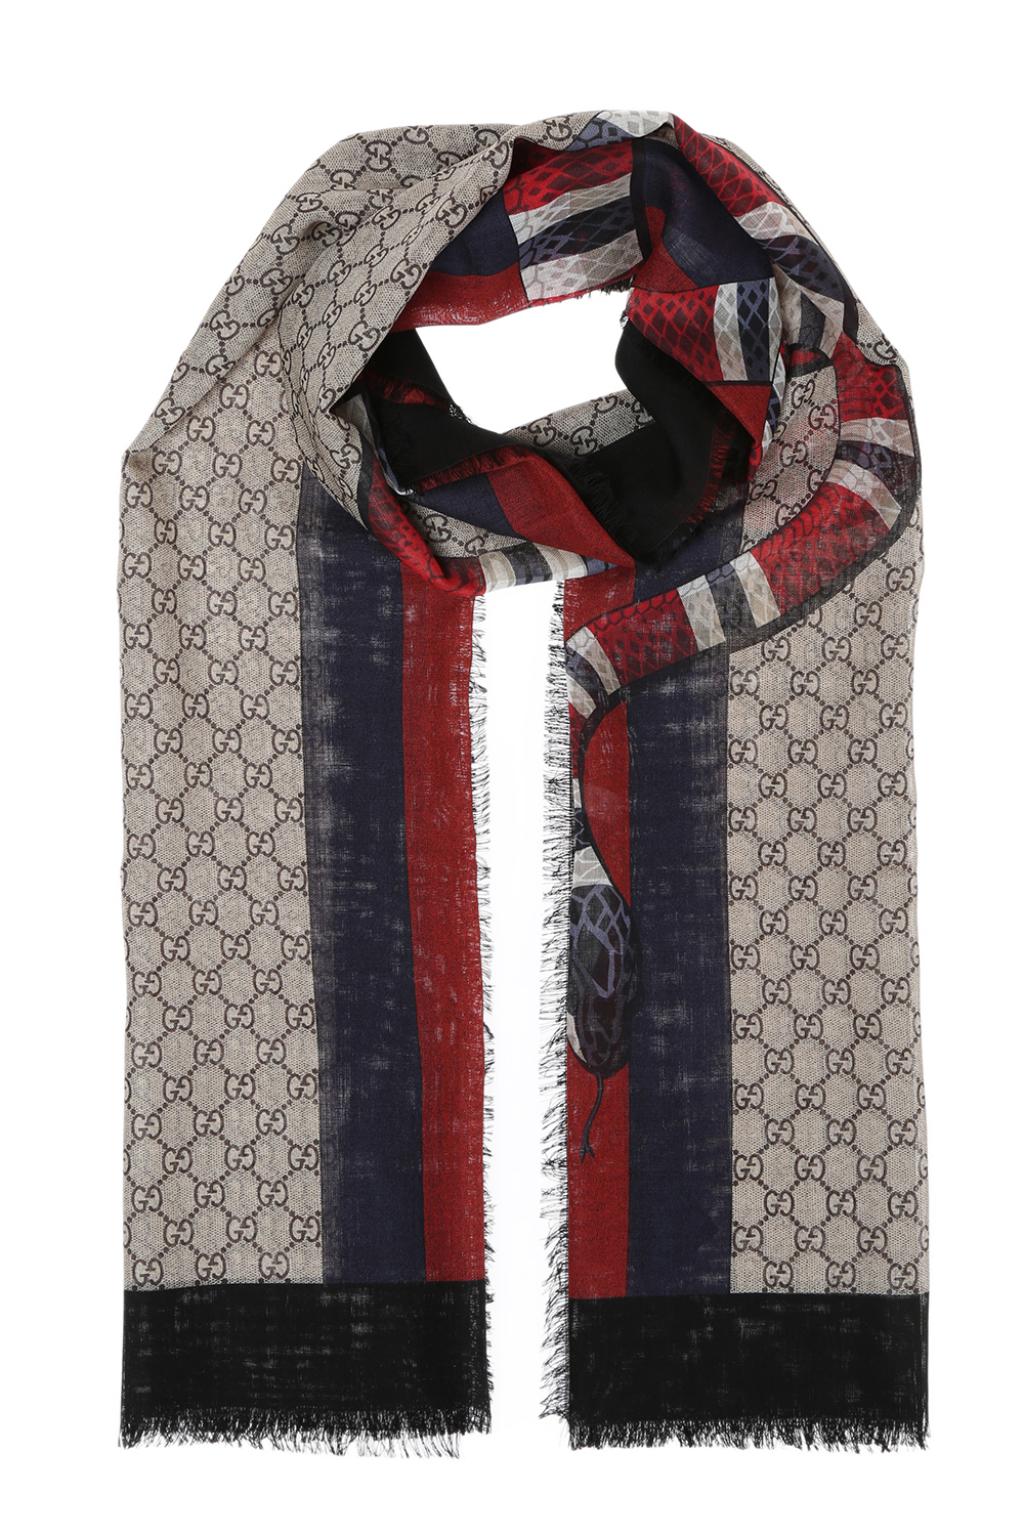 Men's Accessories | Gucci Patterned scarf | the best boots from gucci pre  fall | IetpShops